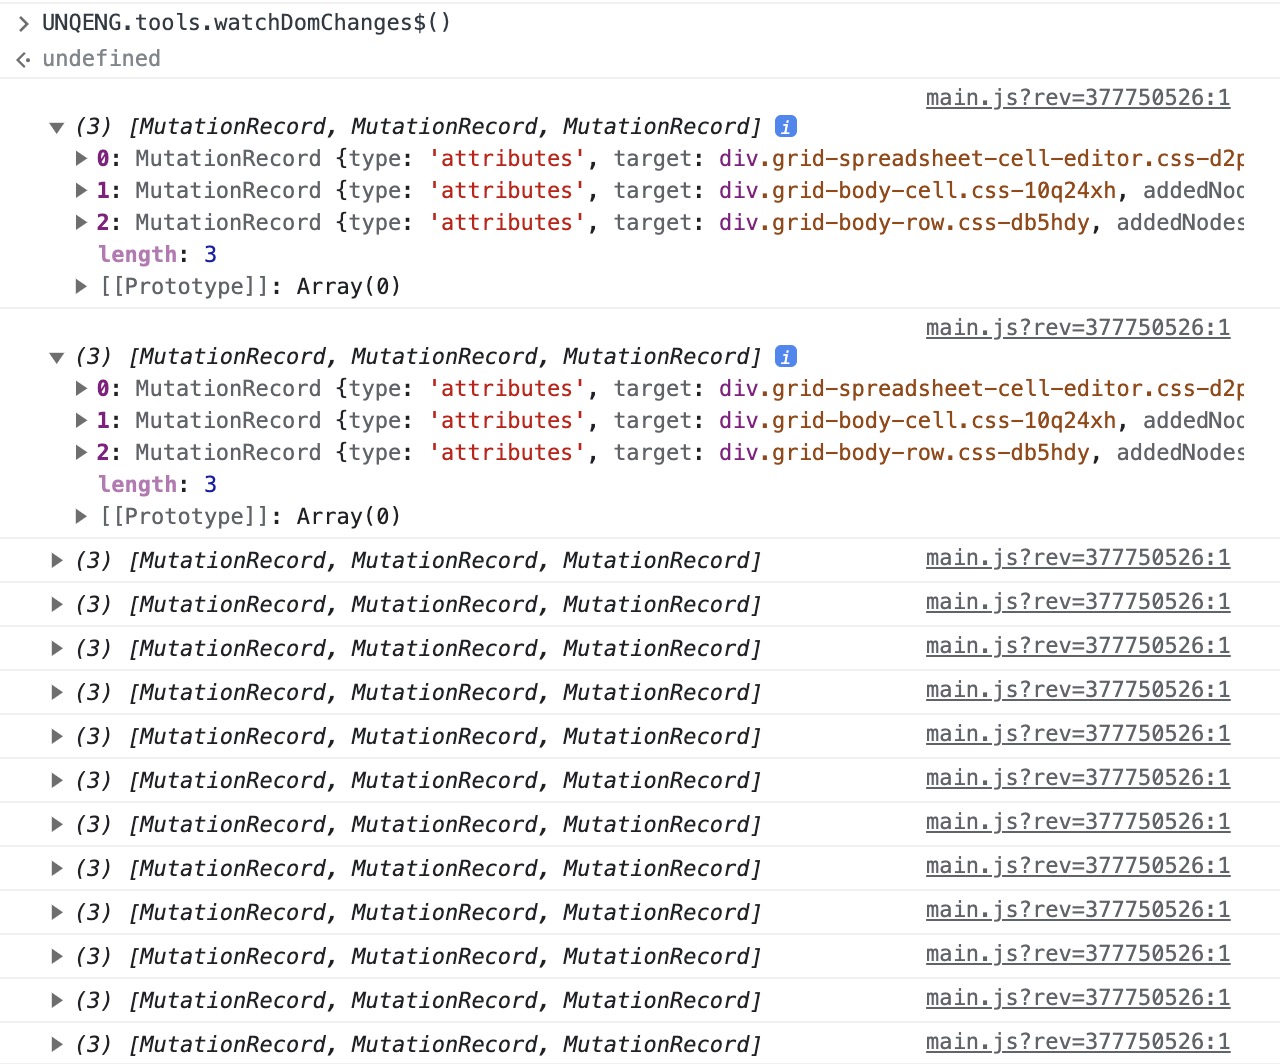 A static image dispaying the Watch DOM Changes function in the DevTools Console.